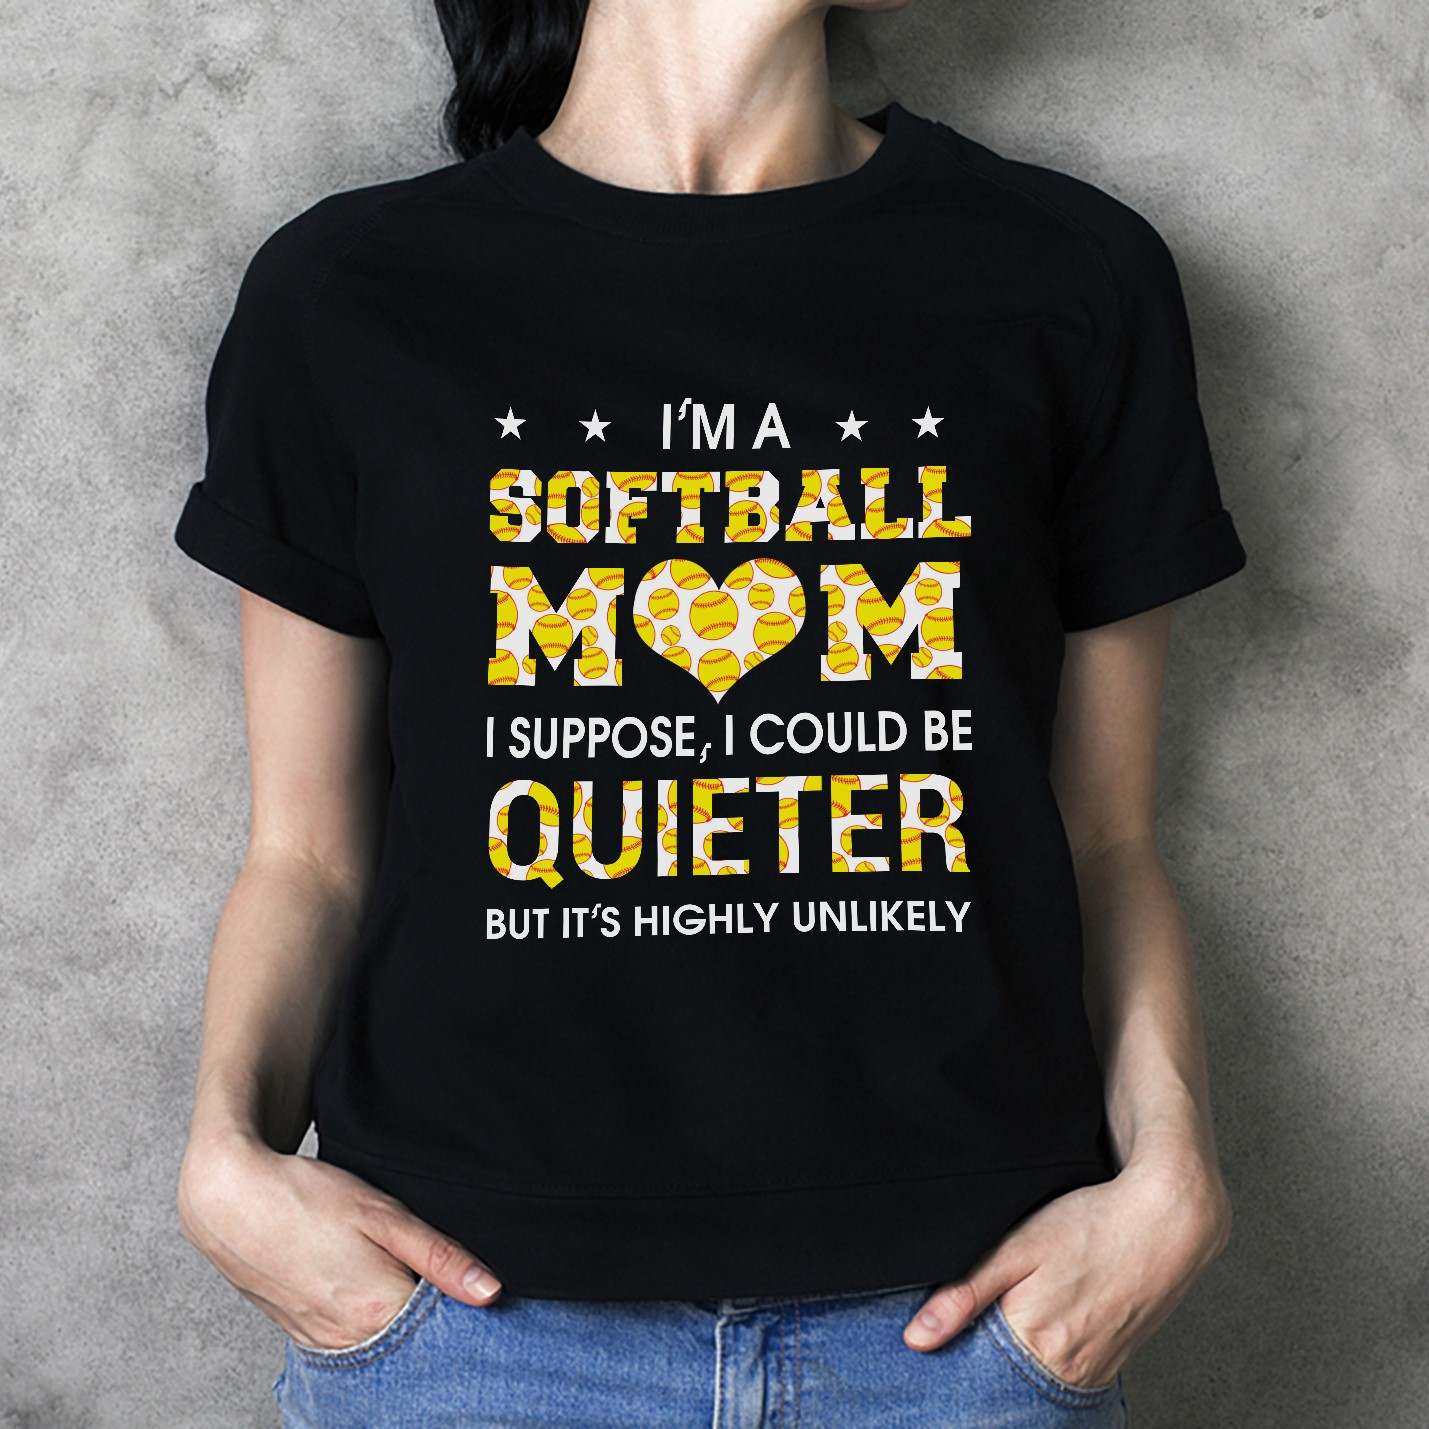 I'm a softball mom i suppose, i could be quieter but it's highly unlikely